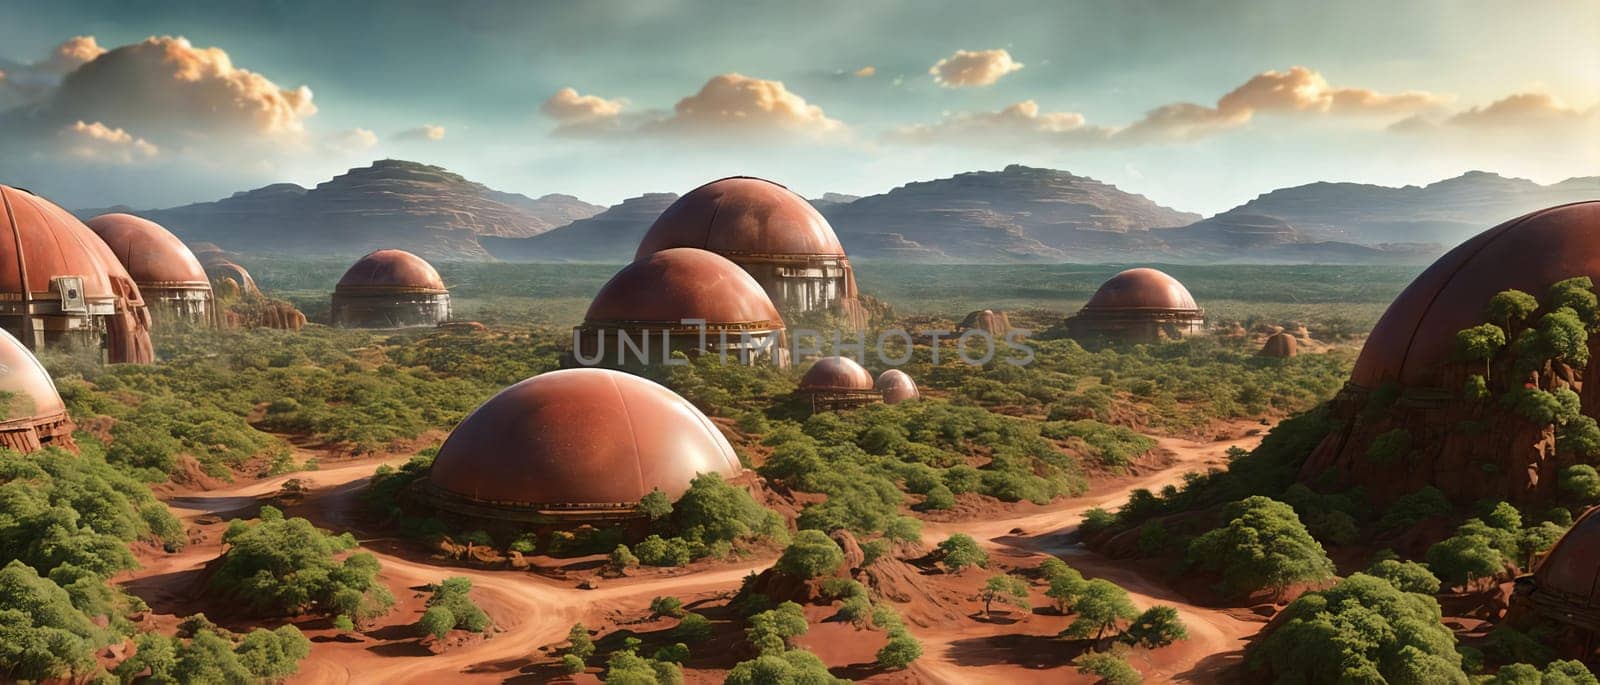 A digital artwork of a transformed Mars settlement in the future, showcasing domed habitats, terraforming machinery, and abundant greenery changing the red planet into a livable world. by GoodOlga